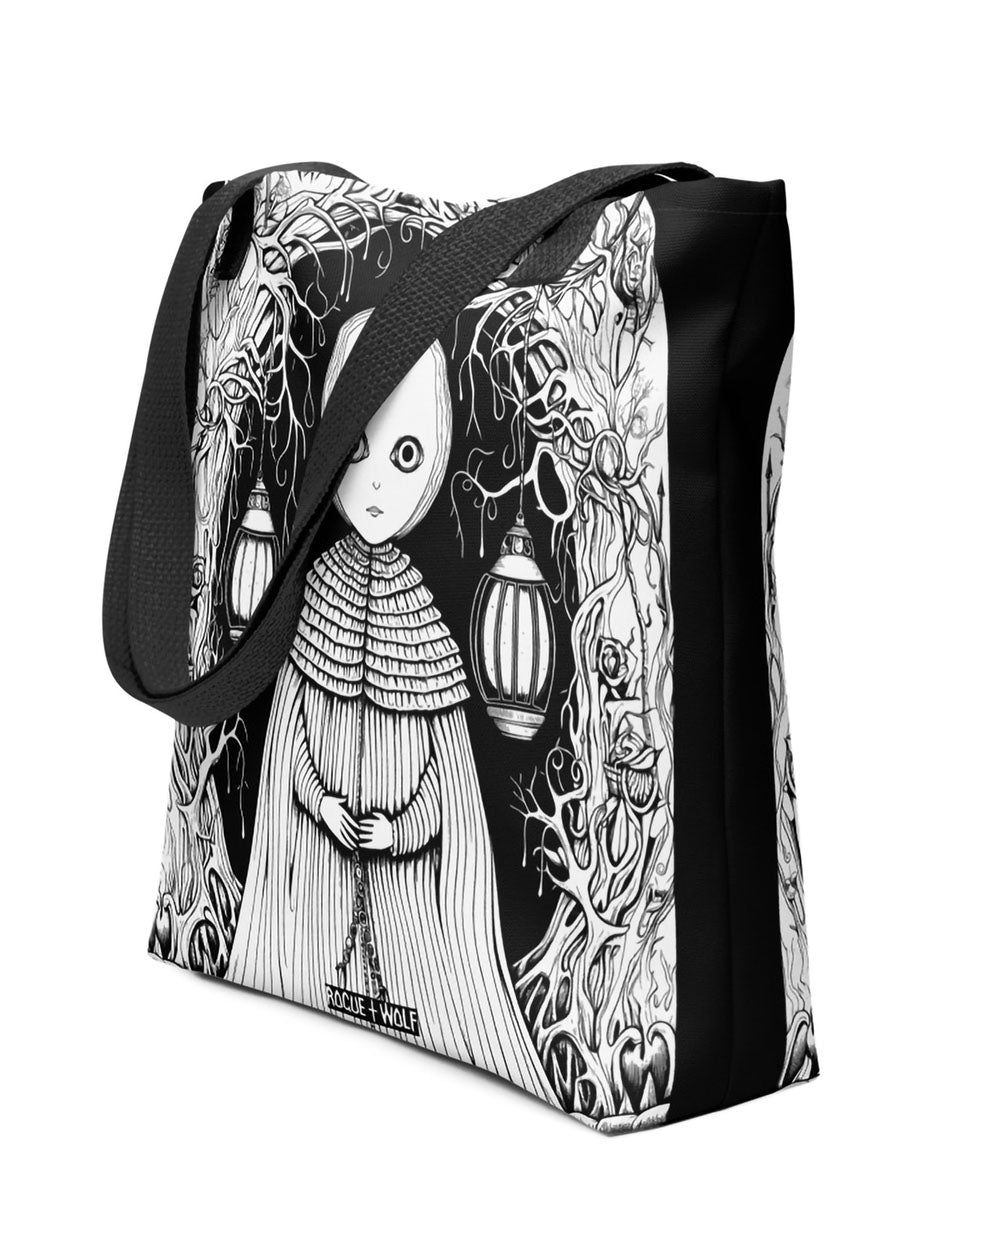 Feeling Lost Vegan Tote Bag - Goth Accessories Witchy Alt Style Large Foldable Tote for All